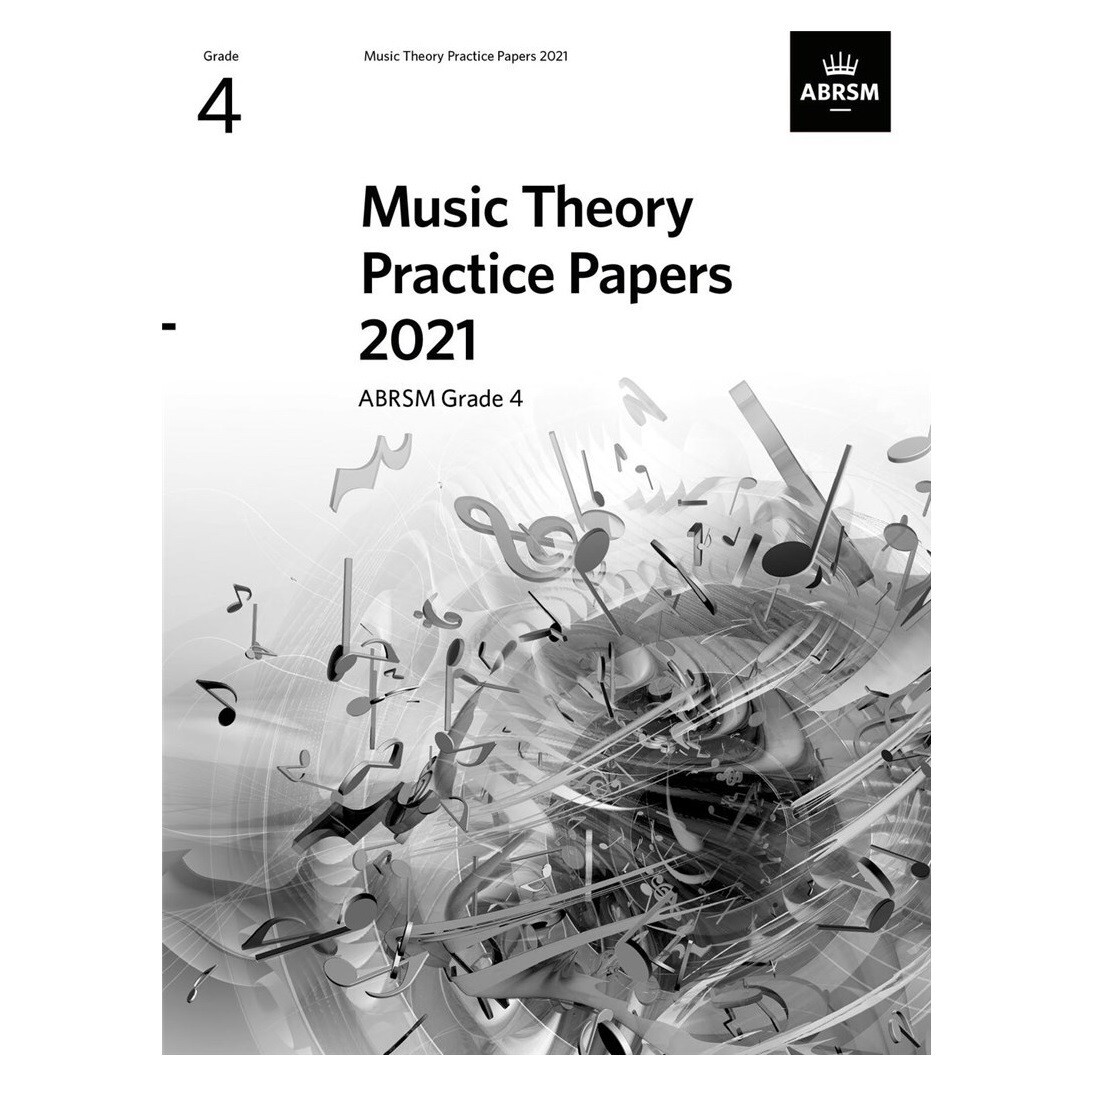 ABRSM Music Theory Practice Papers 2021: Grade 4